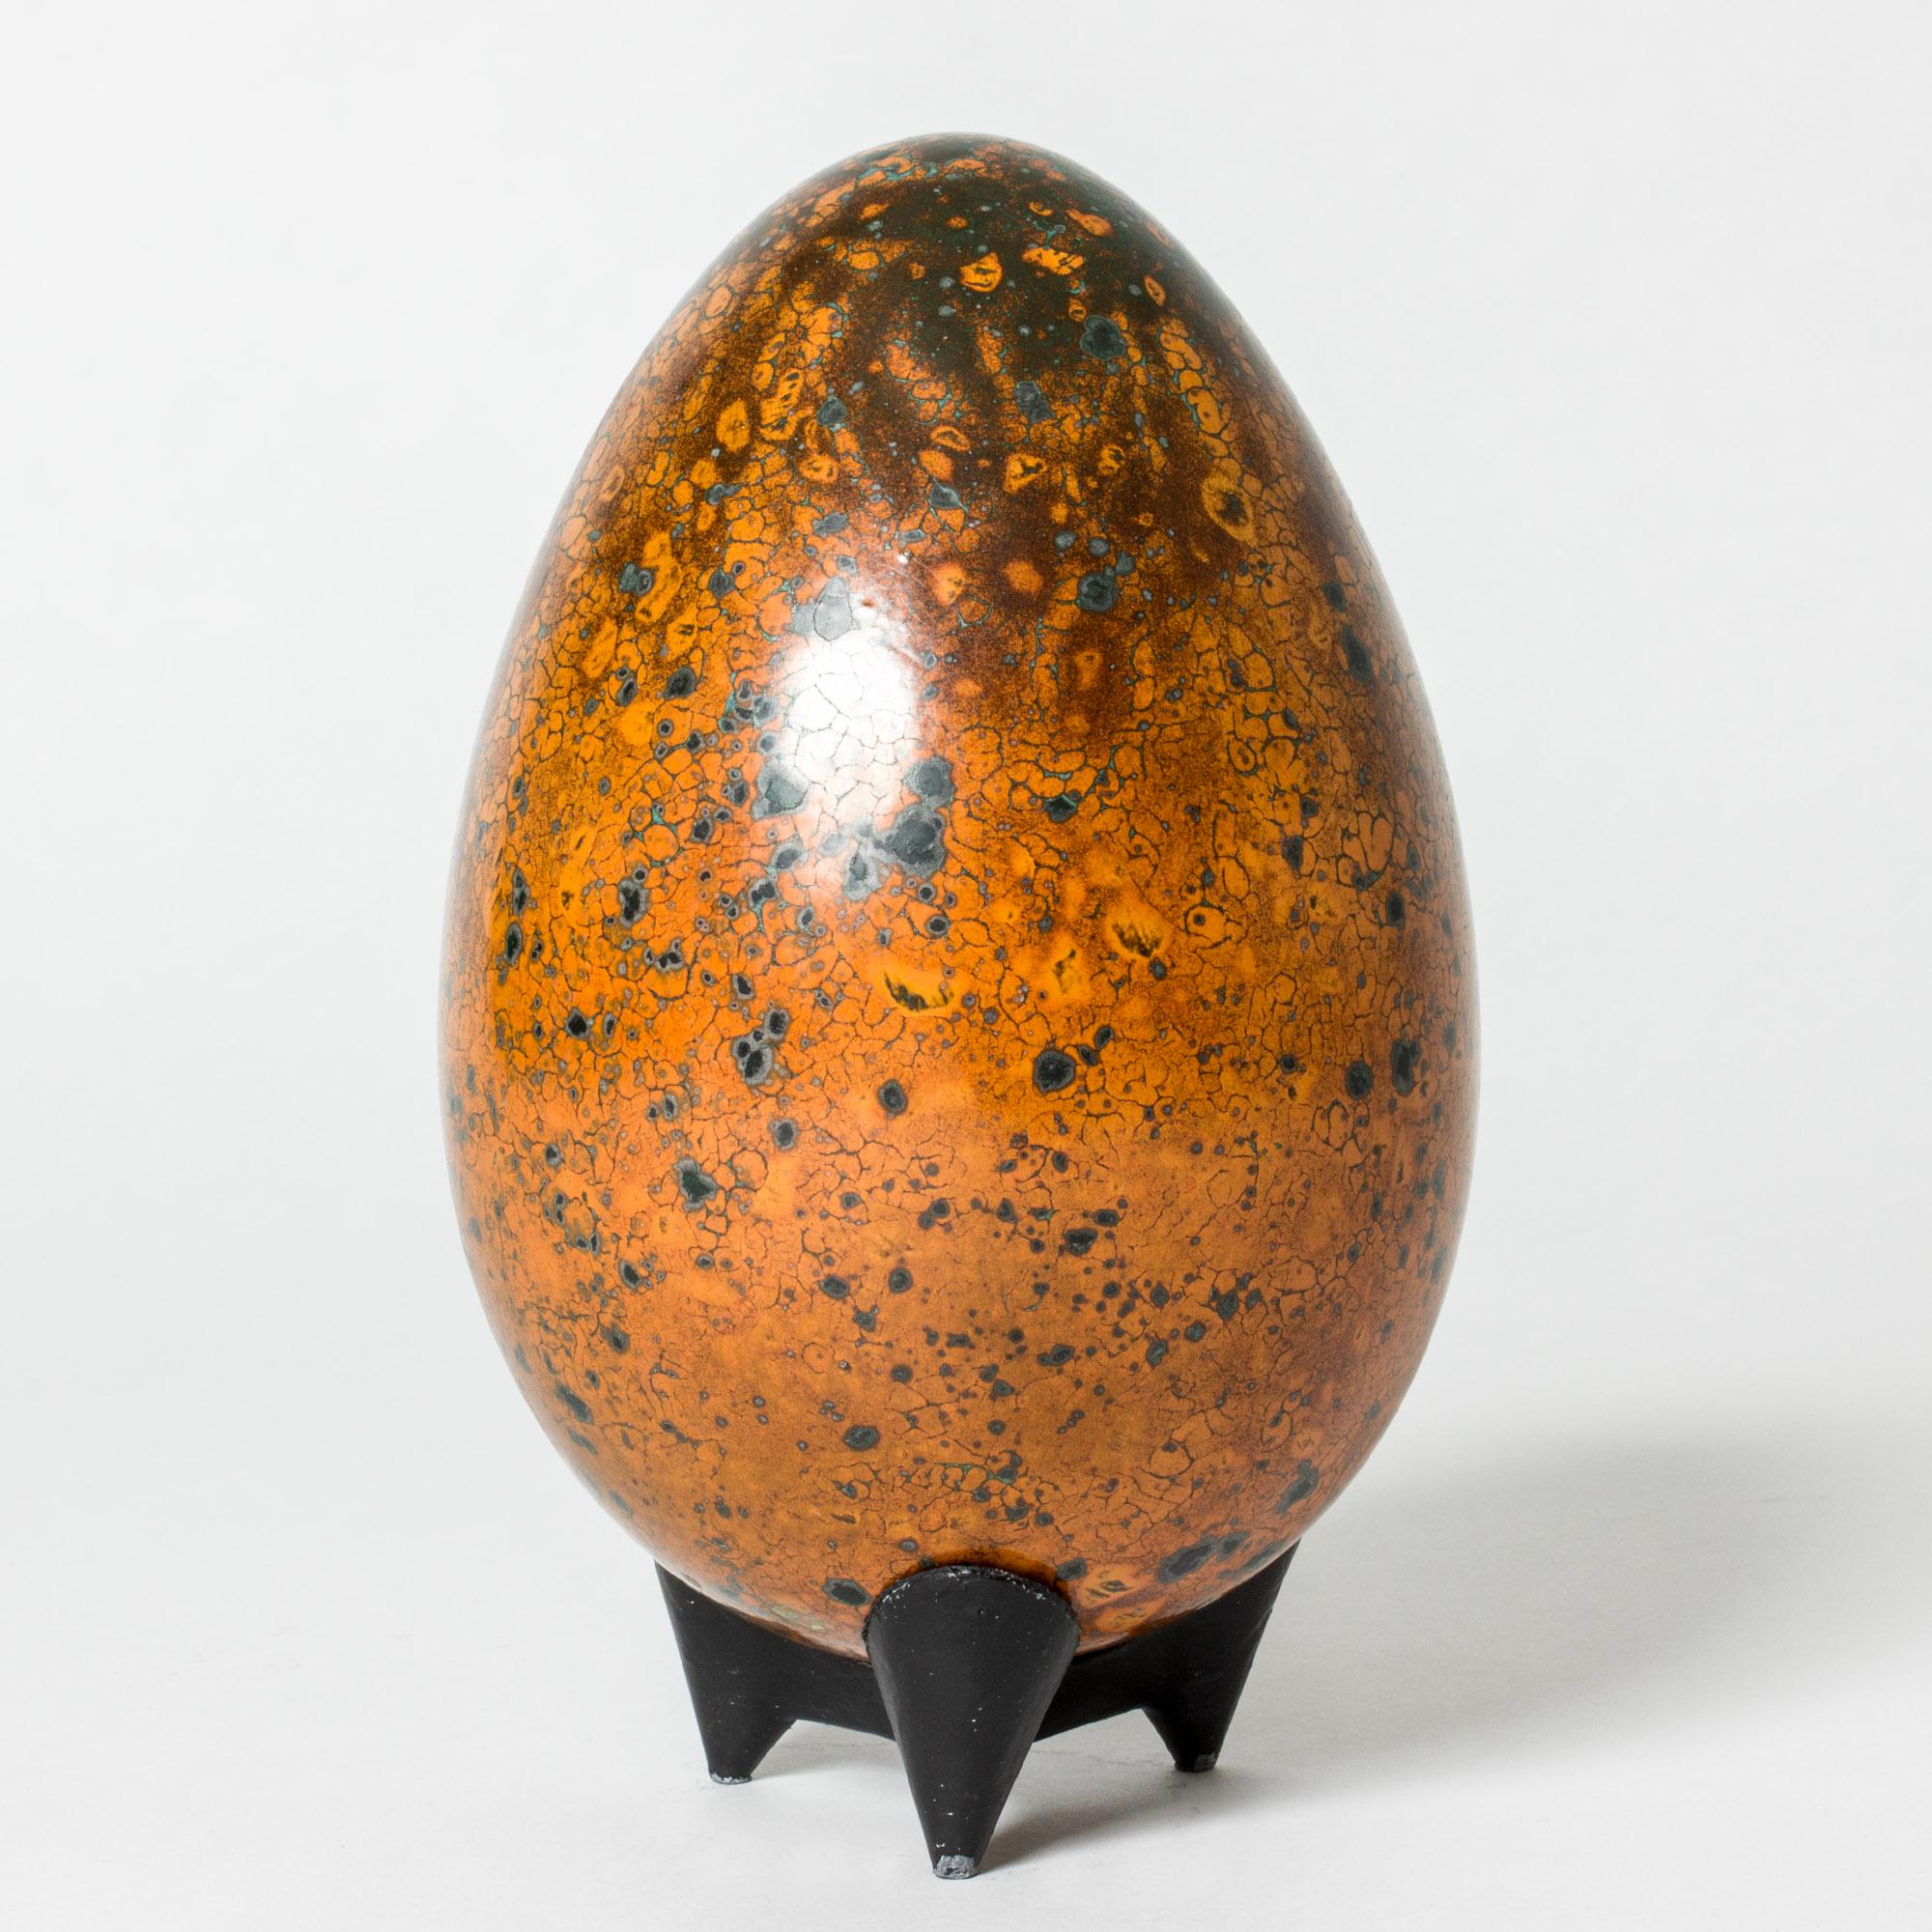 Beautiful egg formed sculpture by Hans Hedberg, made in faience. Intense orange colored glaze with lichen-like flecks giving an organic expression. Cast iron base.